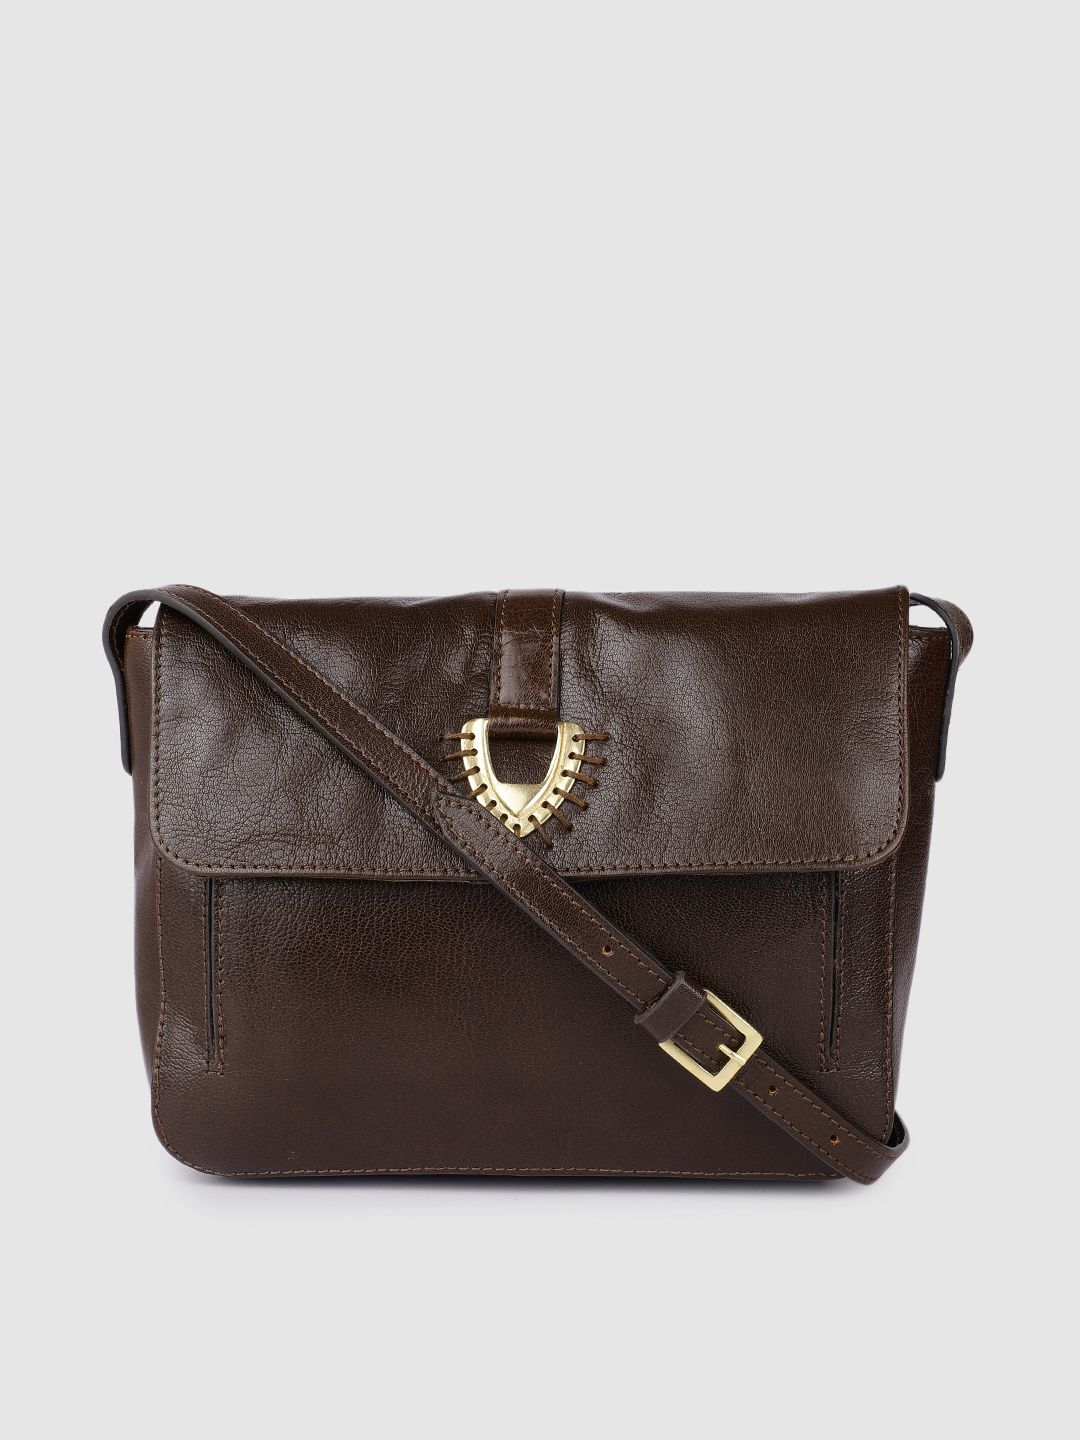 Hidesign Brown Leather Sling Bag Price in India